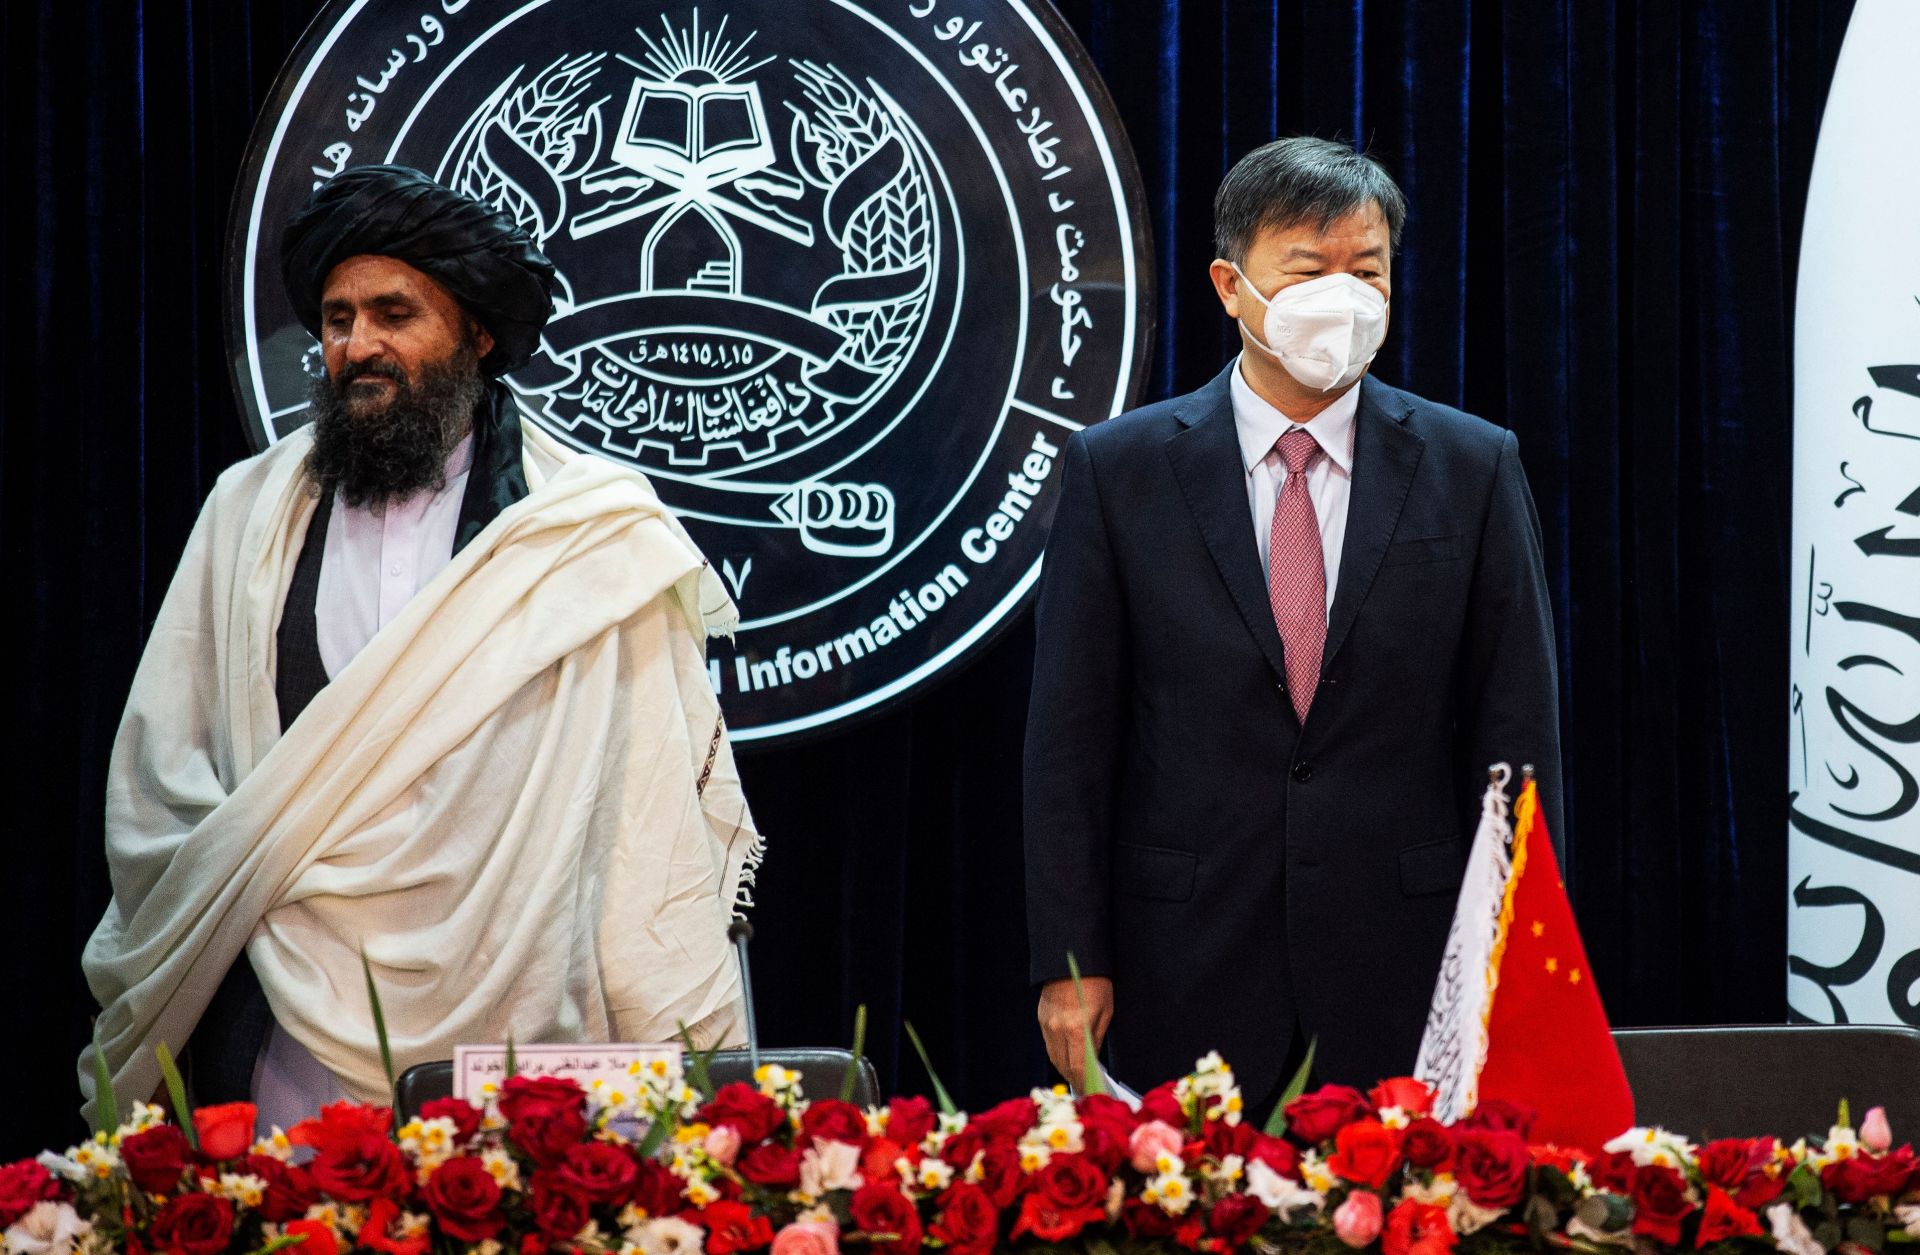 Afghanistan's acting Deputy Prime Minister, Abdul Mullah Abdul Ghani Baradar, (L) and China's Ambassador to Afghanistan, Wang Yu, (R) attend a press conference to announce an oil extraction contract with a Chinese company in Kabul, Afghanistan, on Jan. 5, 2023.